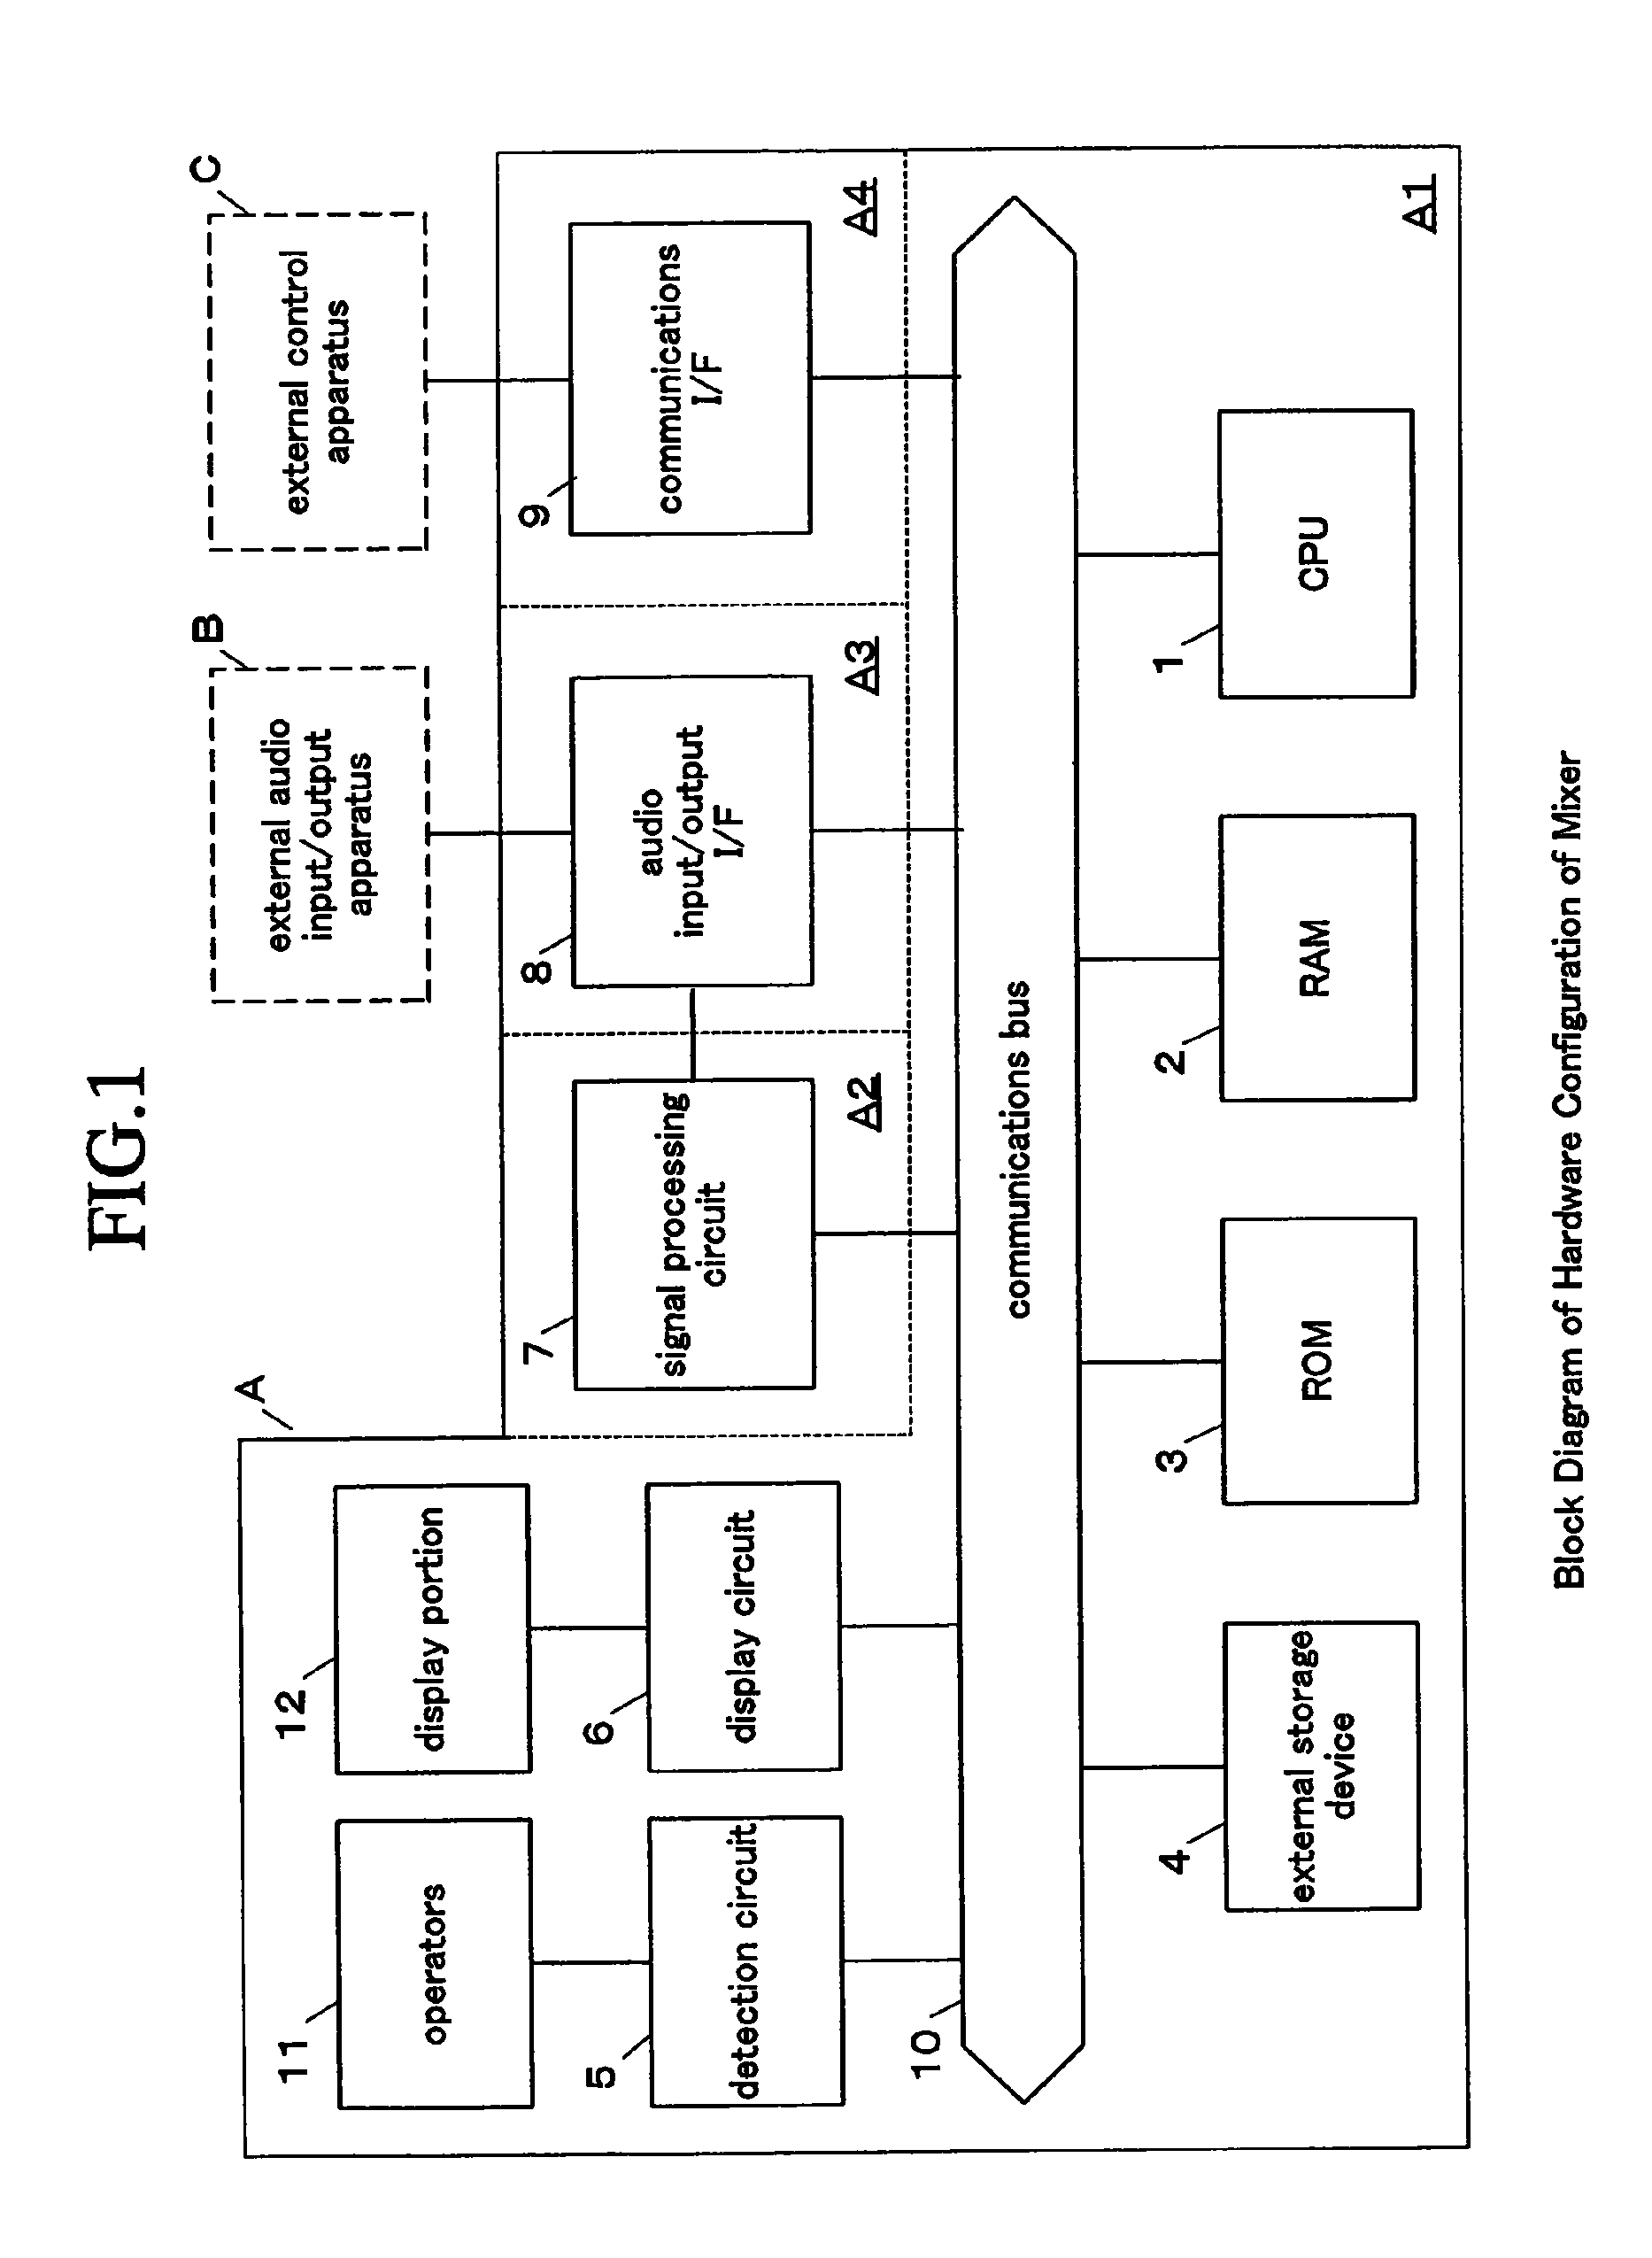 Parameter display controller for an acoustic signal processing apparatus